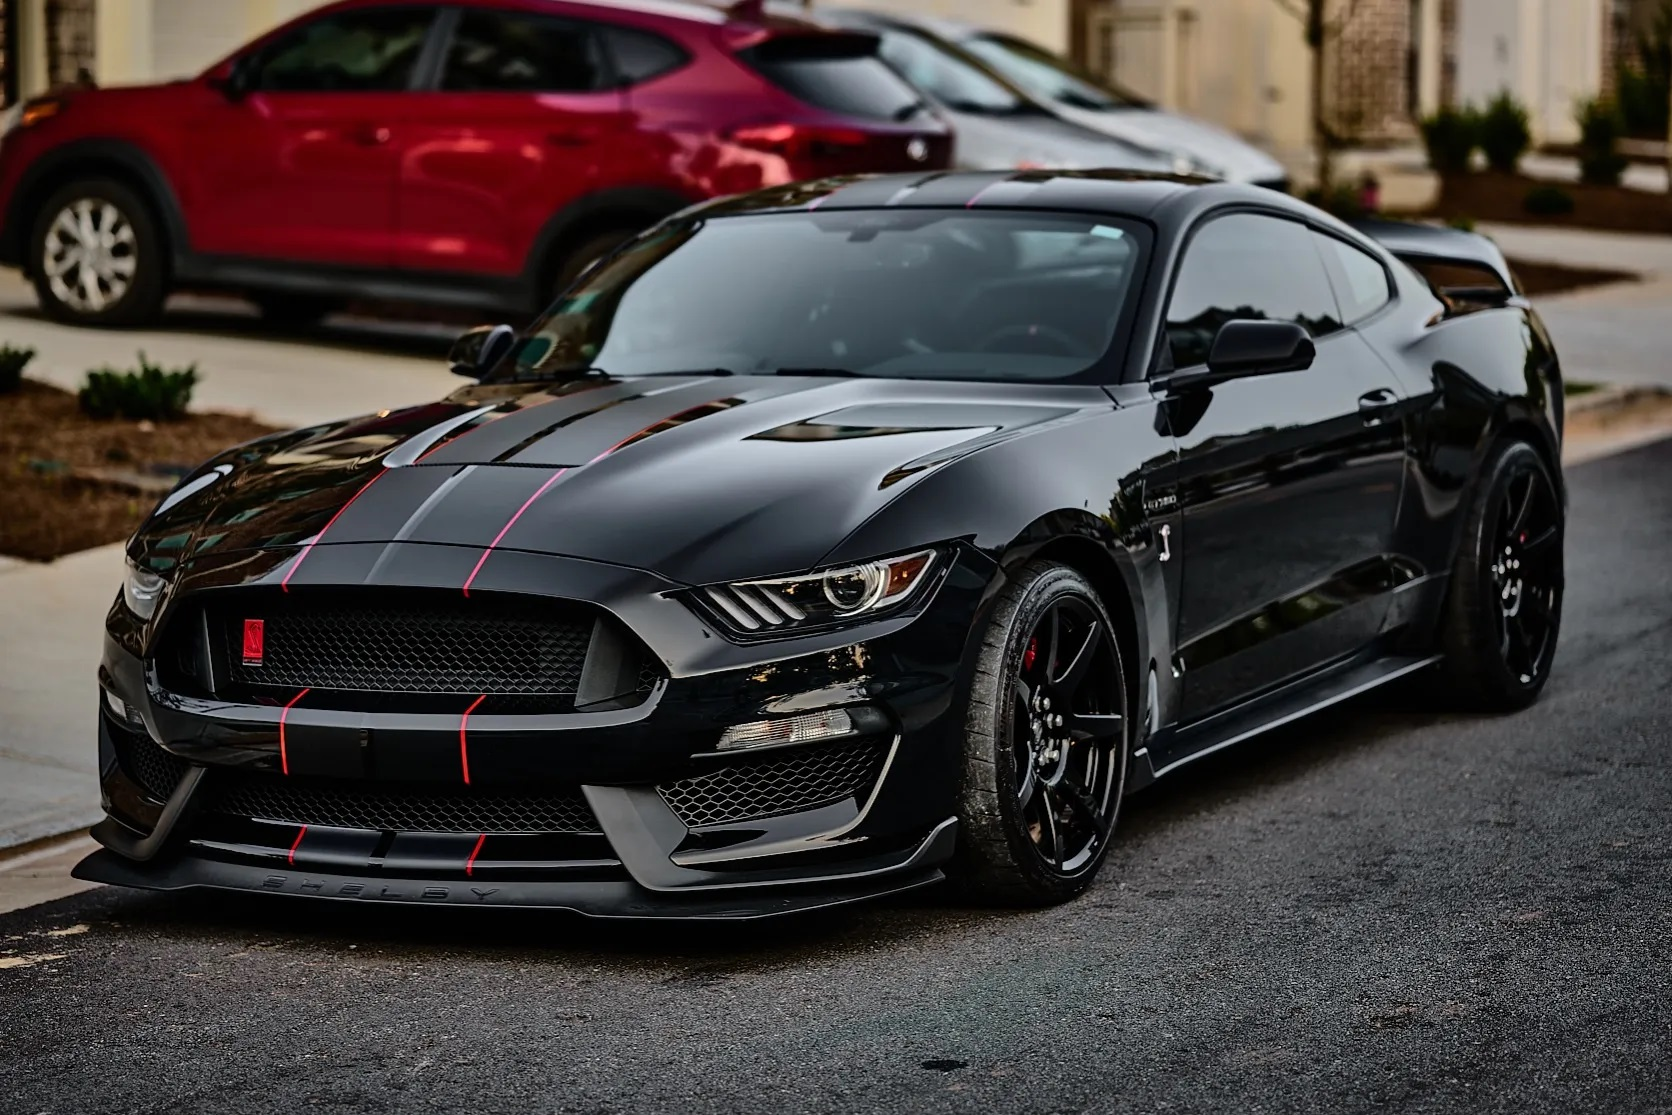 2018 Ford Mustang Shelby GT350R Has Only 1,700 miles On The Odometer